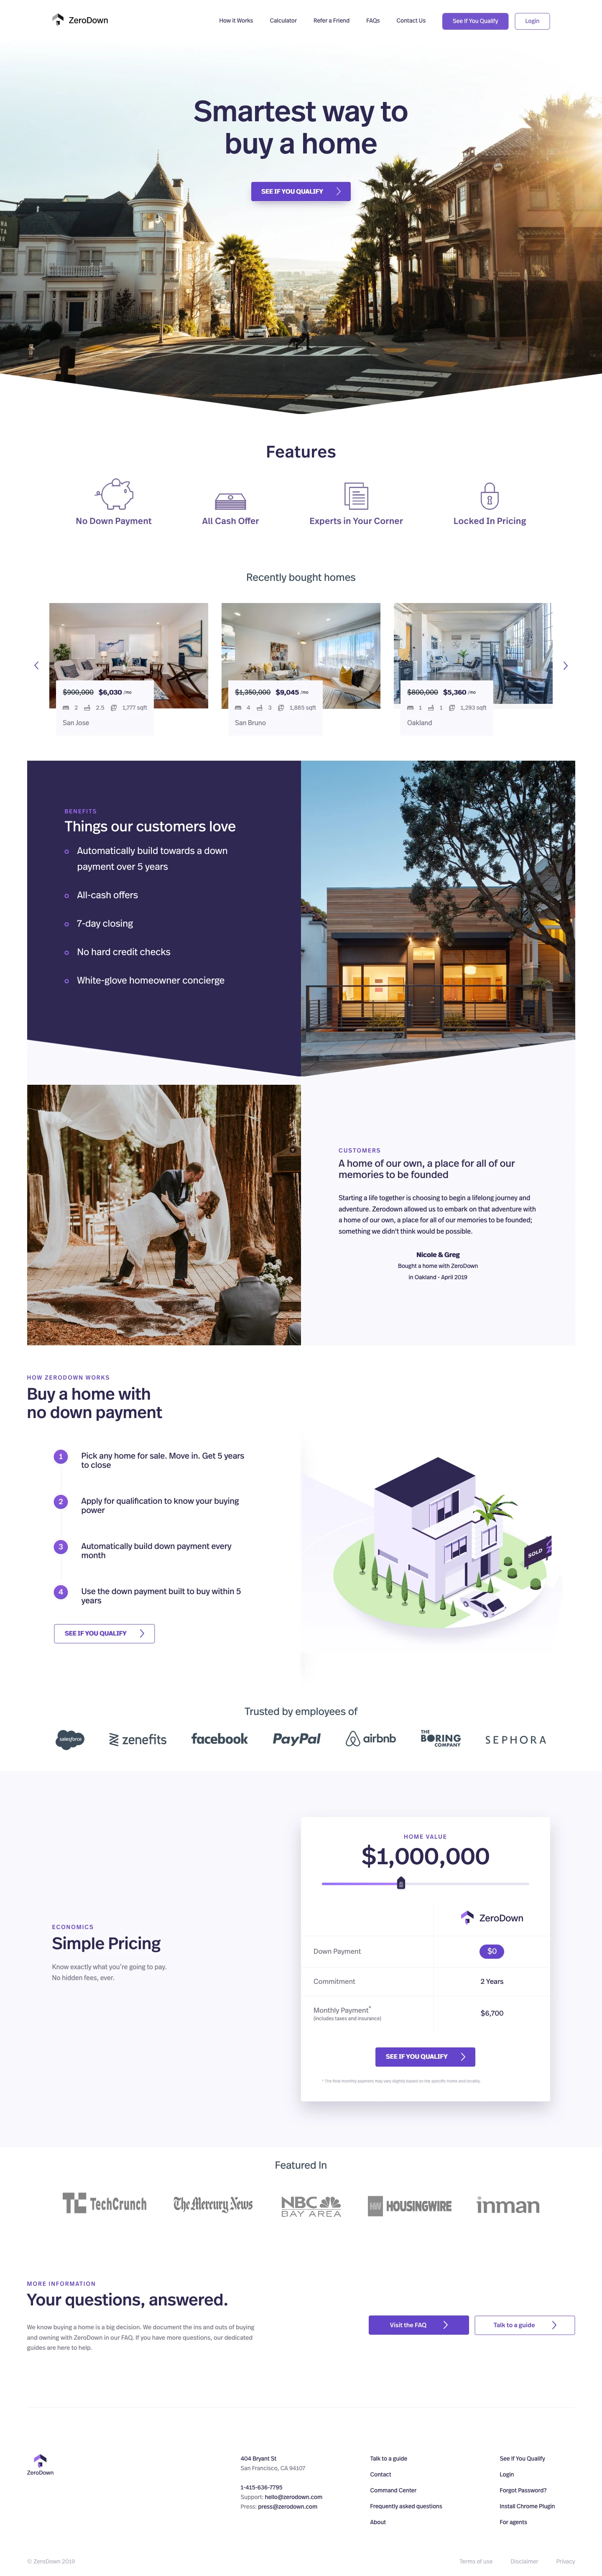 ZeroDown Landing Page Example: ZeroDown is creating a new pathway to homeownership in the Bay Area. Enjoy the benefits of owning with the flexibility of renting. We buy the home you want, you move in without a down payment and build towards ownership every month.